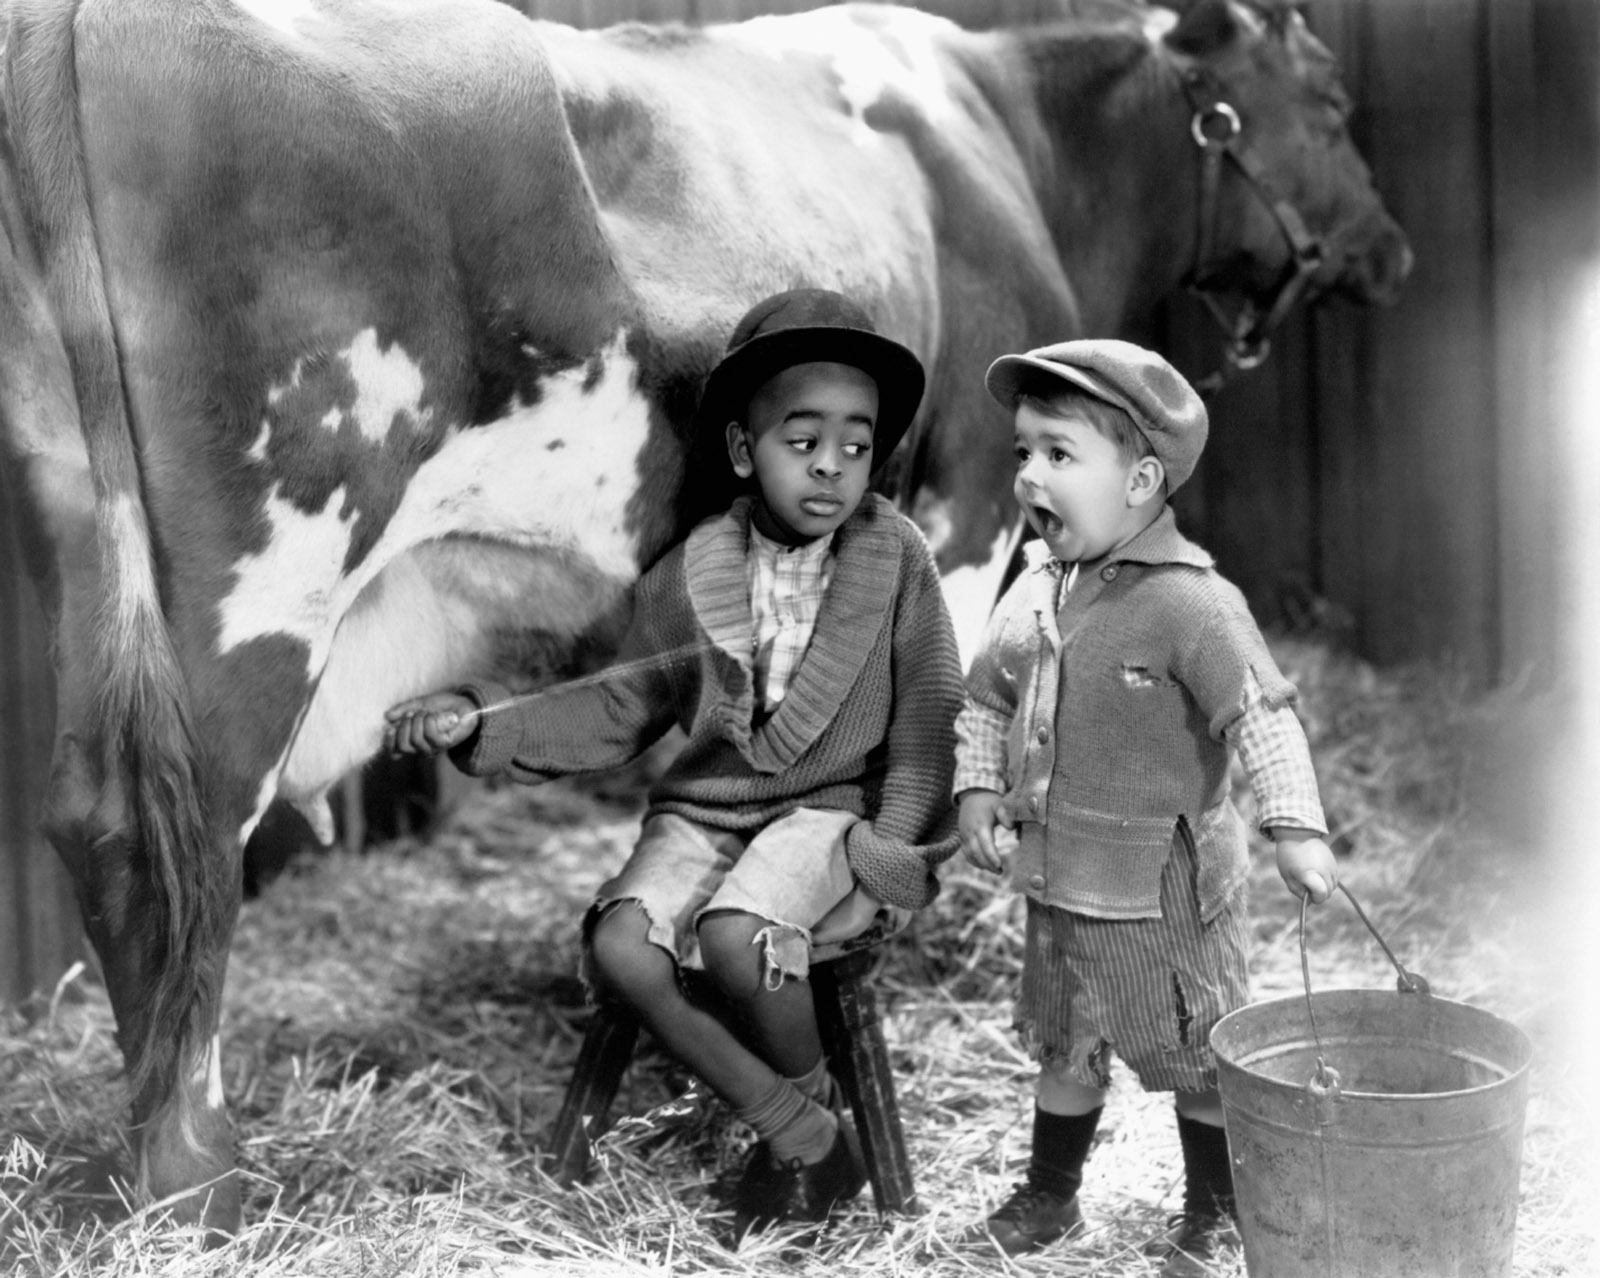 Matthew ‘Stymie’ Beard and George ‘Spanky’ McFarland in Mush and Milk, from the Our Gang/Little Rascals series, 1933